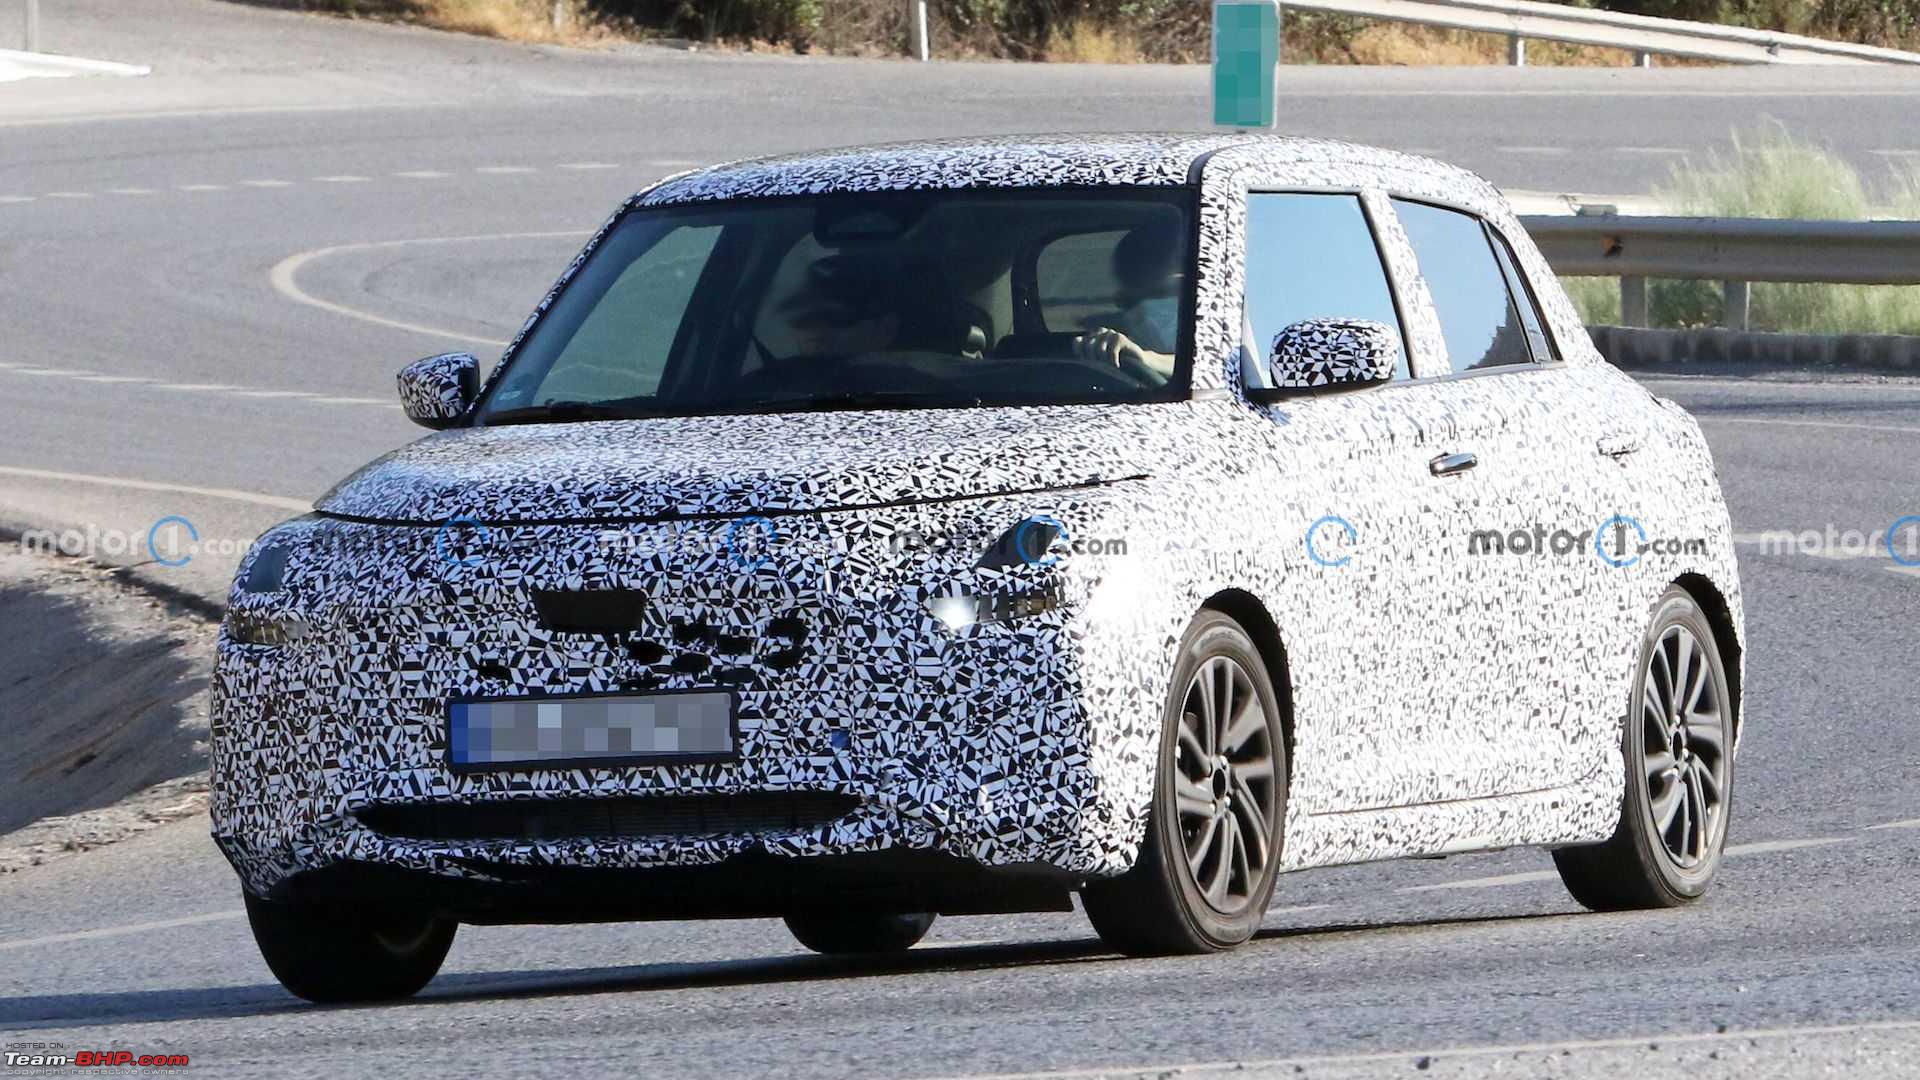 Here's What Next Suzuki Swift Could Look Like Based On Spy Shots